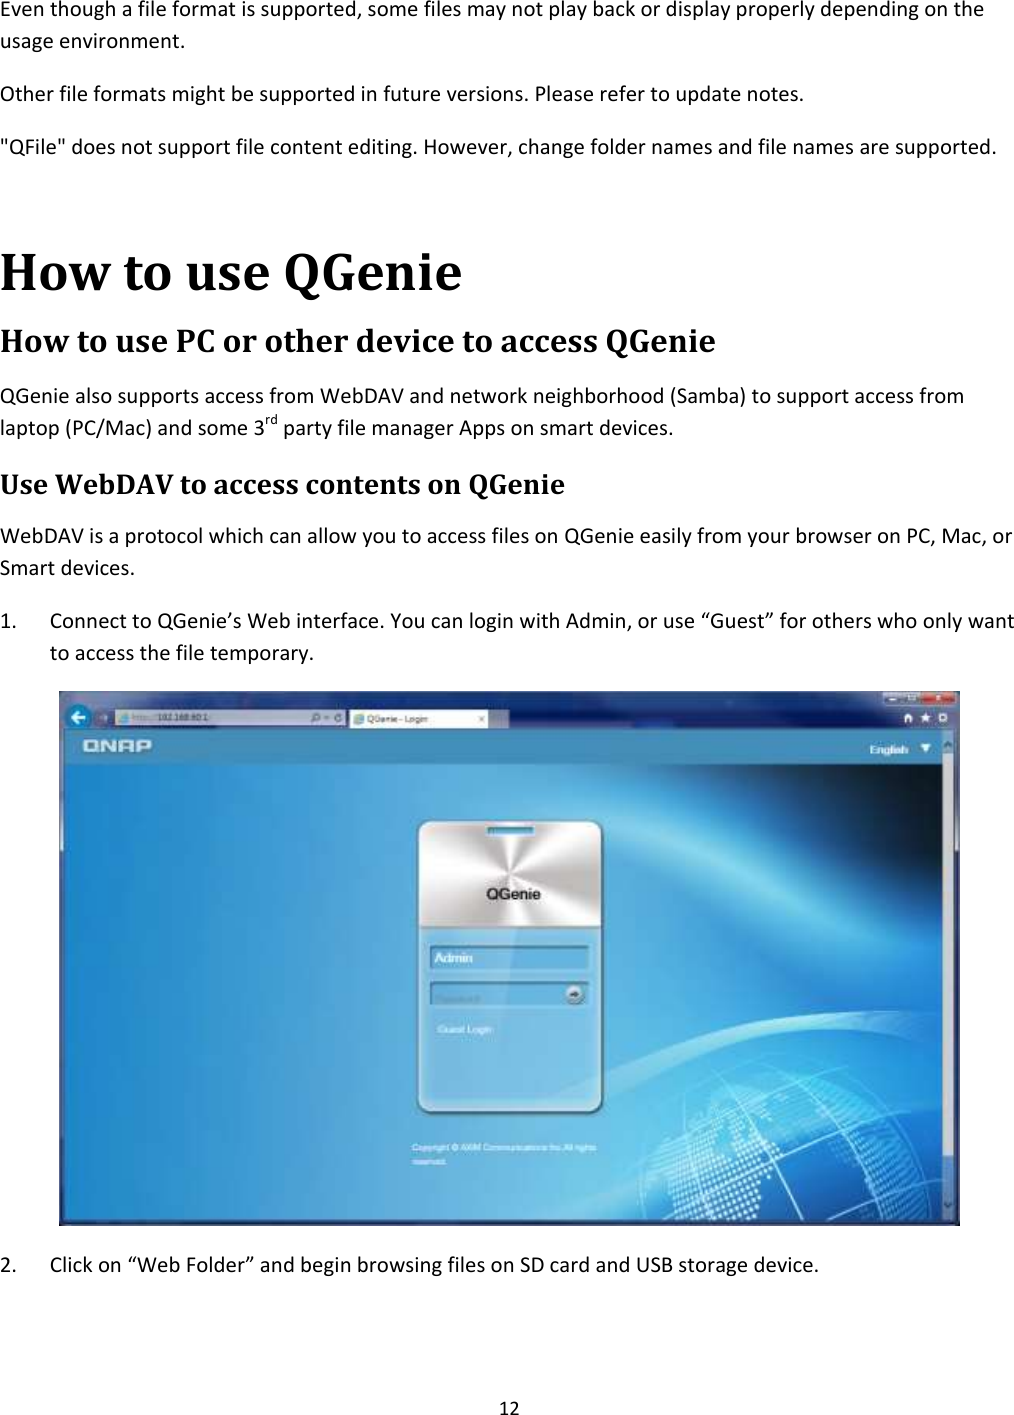 12  Even though a file format is supported, some files may not play back or display properly depending on the usage environment. Other file formats might be supported in future versions. Please refer to update notes. &quot;QFile&quot; does not support file content editing. However, change folder names and file names are supported.  How to use QGenie How to use PC or other device to access QGenie QGenie also supports access from WebDAV and network neighborhood (Samba) to support access from laptop (PC/Mac) and some 3rd party file manager Apps on smart devices. Use WebDAV to access contents on QGenie WebDAV is a protocol which can allow you to access files on QGenie easily from your browser on PC, Mac, or Smart devices. 1. Connect to QGenie’s Web interface. You can login with Admin, or use “Guest” for others who only want to access the file temporary.  2. Click on “Web Folder” and begin browsing files on SD card and USB storage device. 